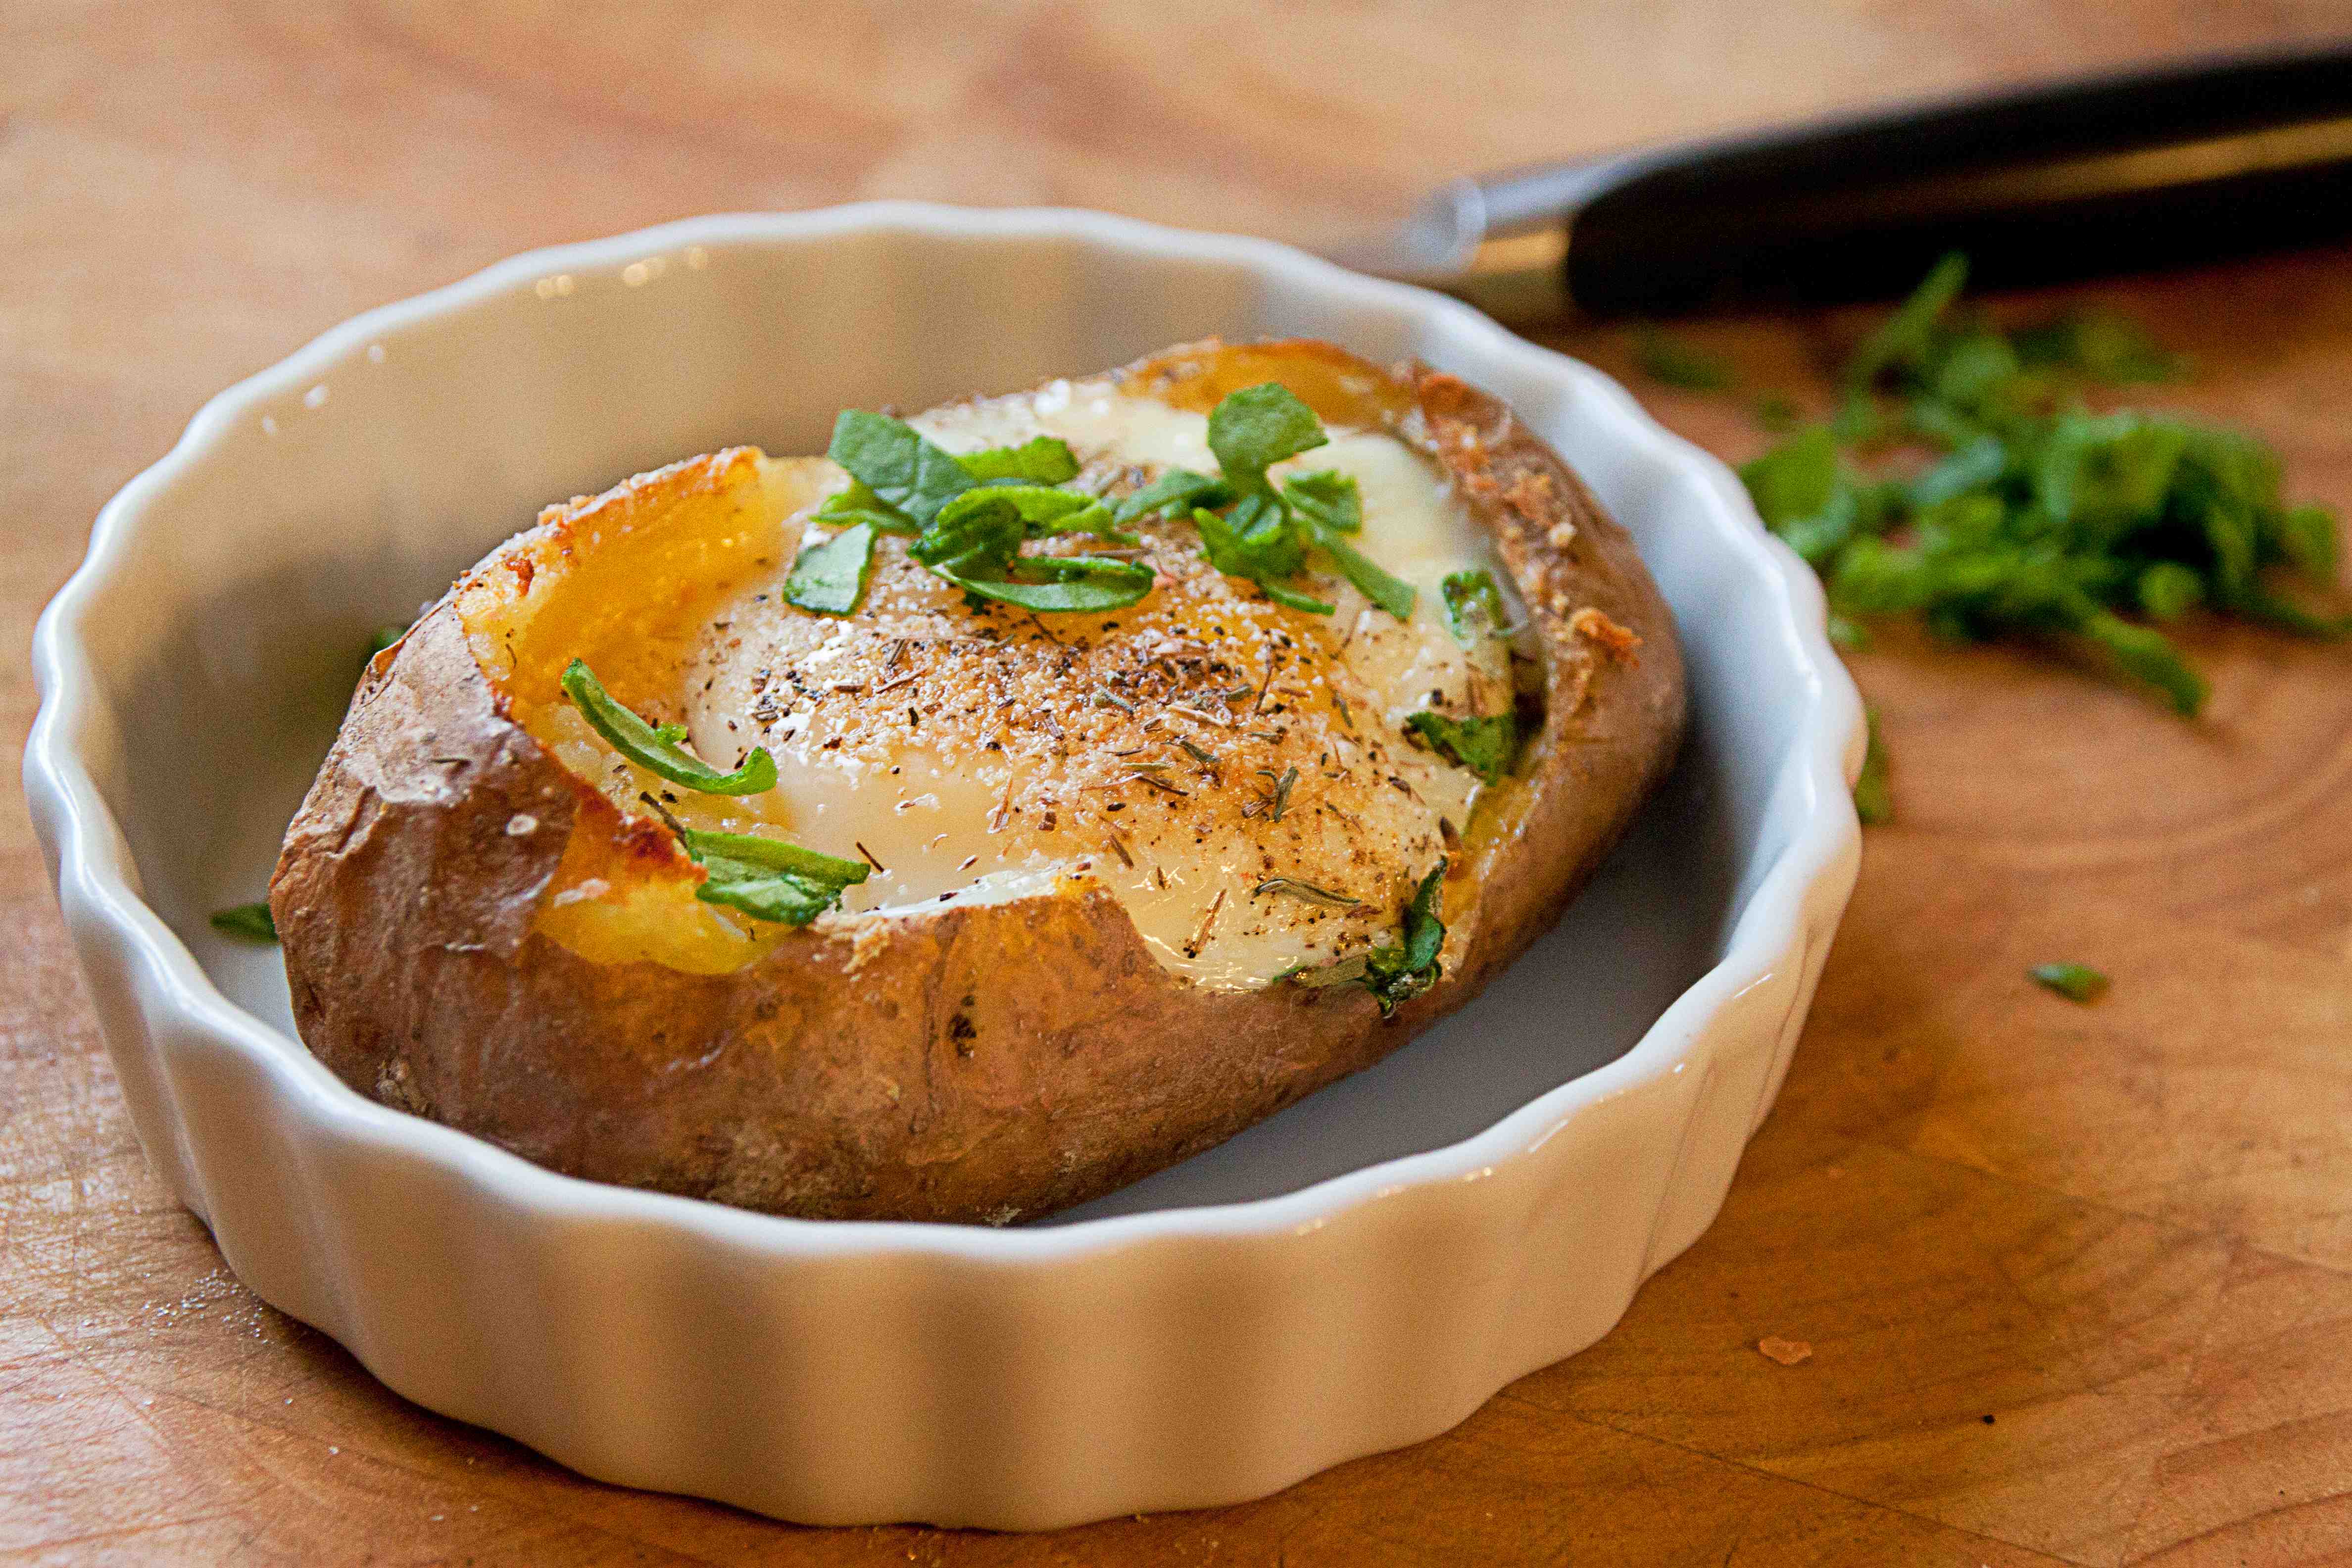 Stuffed Baked Potato with Egg and Thyme – Clearly Delicious